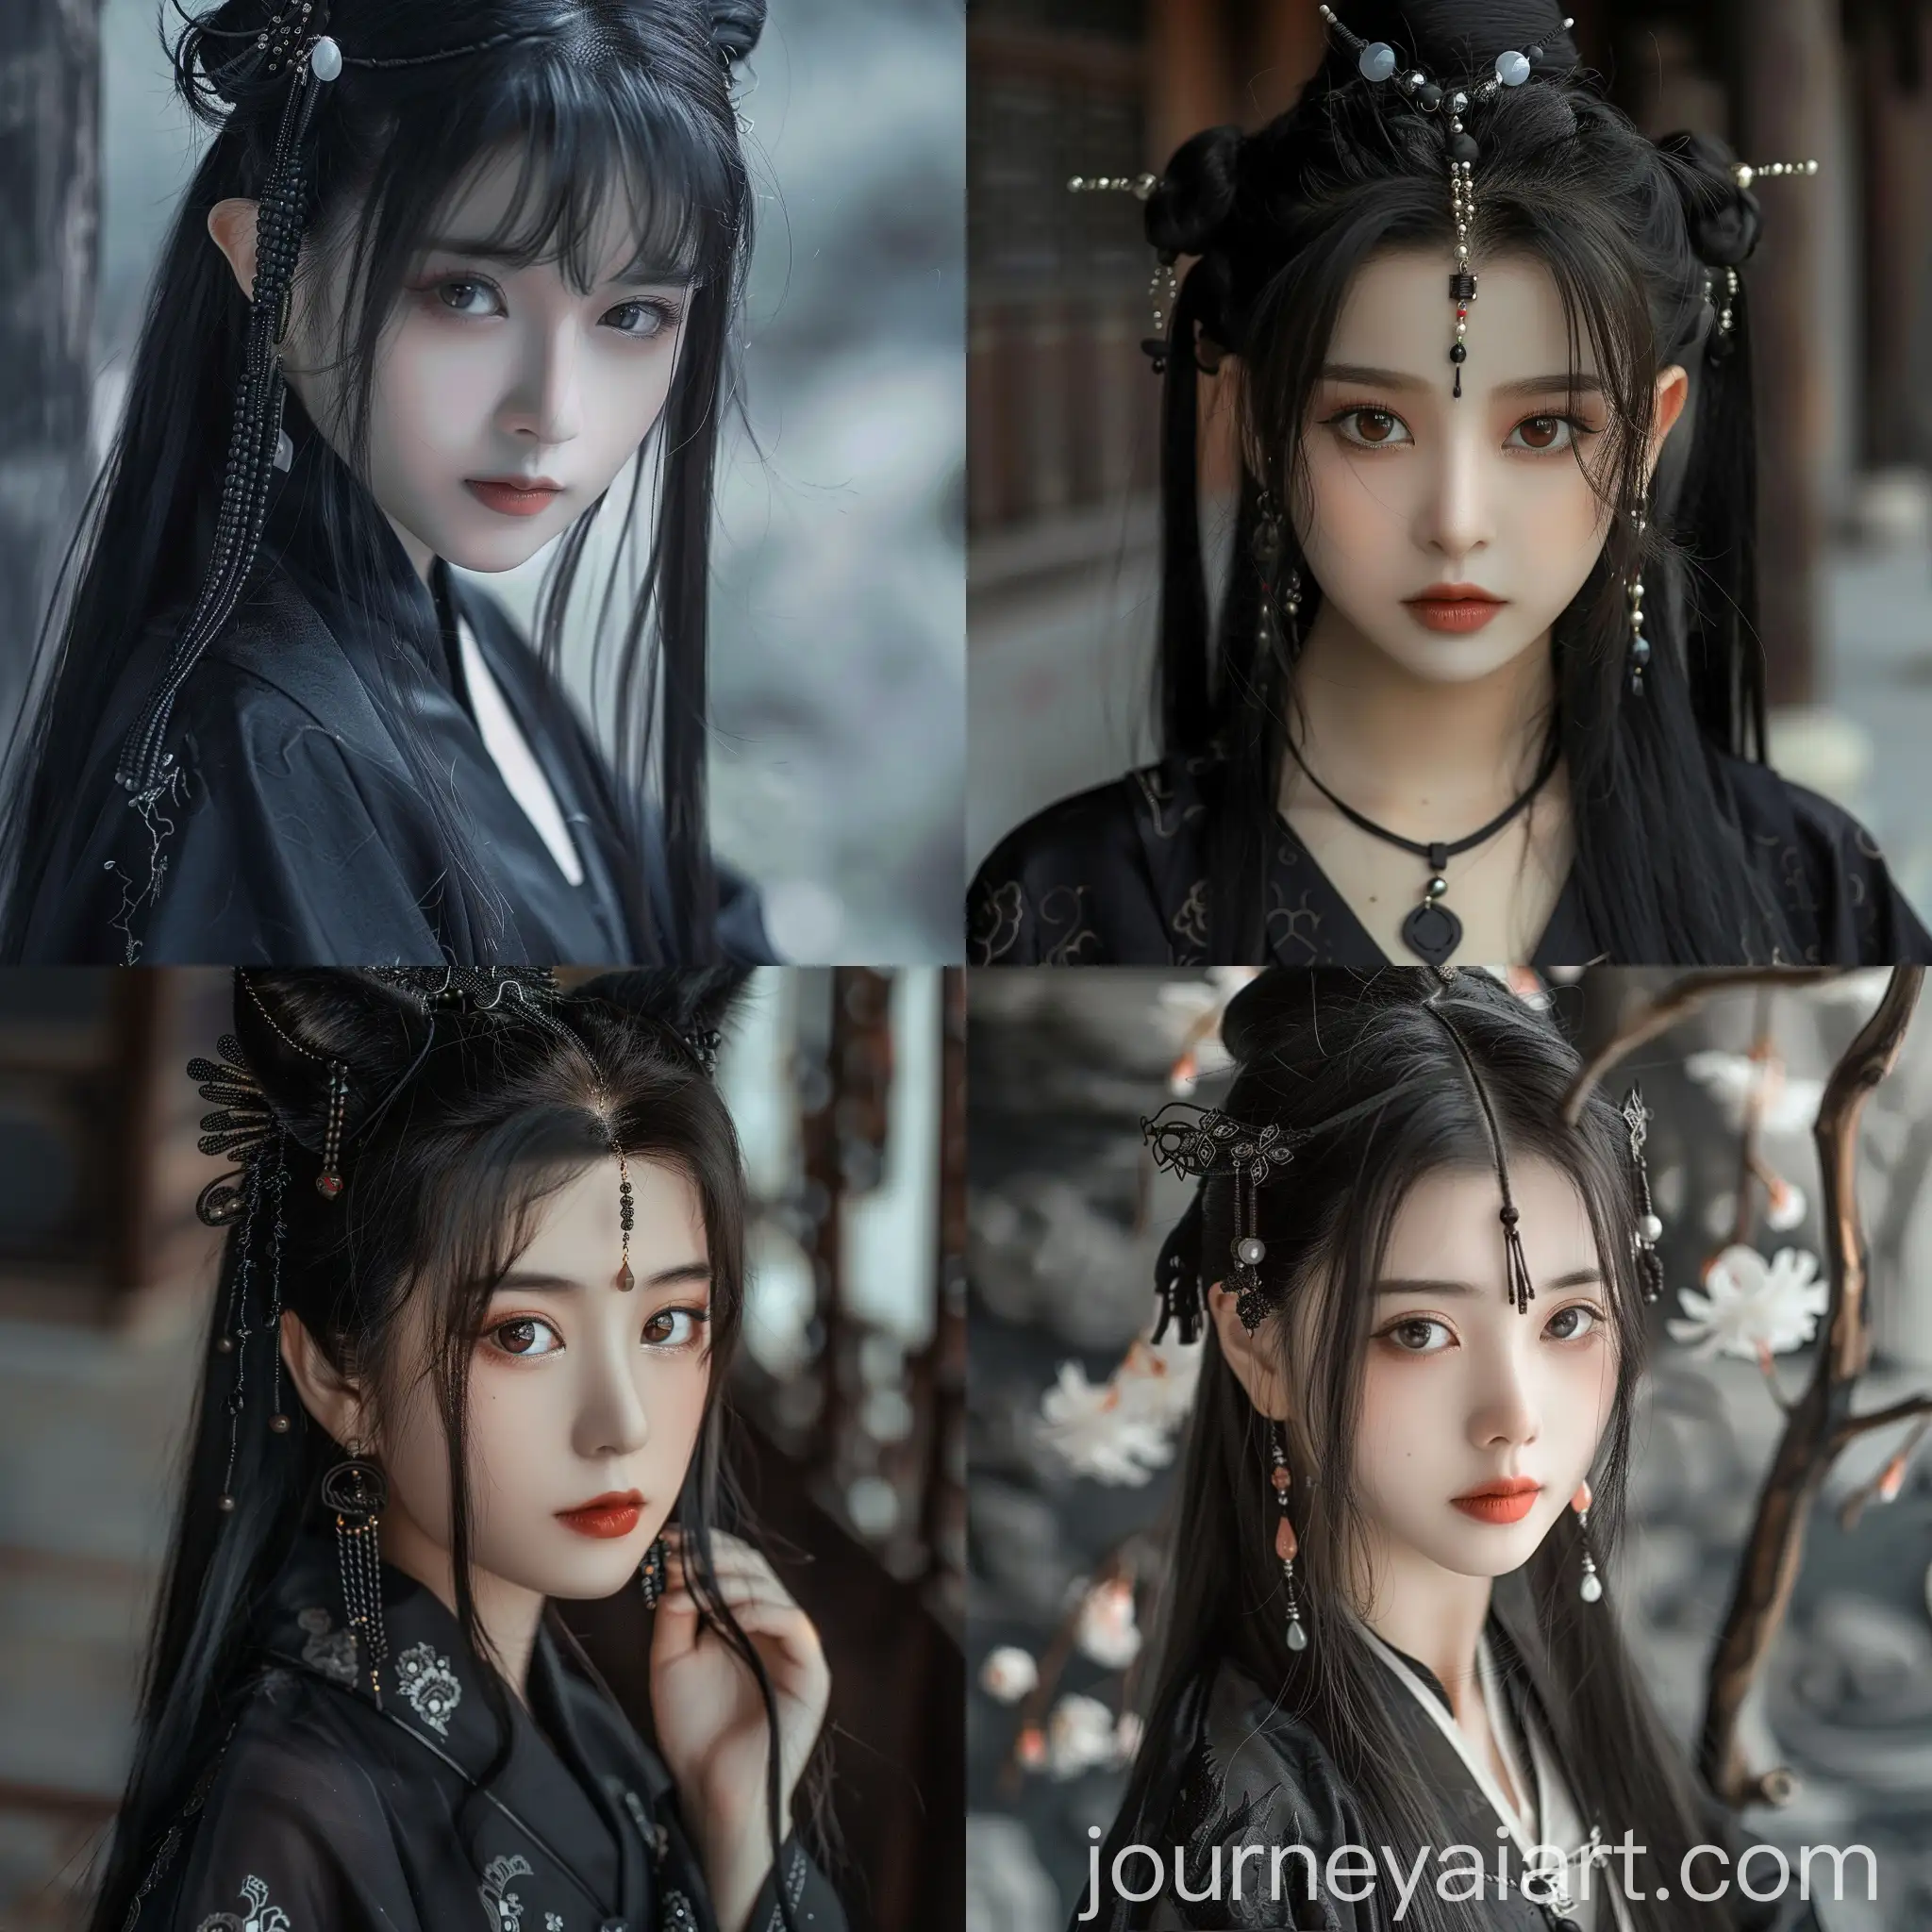 Chinese-Girl-in-Elegant-Wuxia-Hanfu-with-Long-Black-Hair-and-Ethereal-Accessories